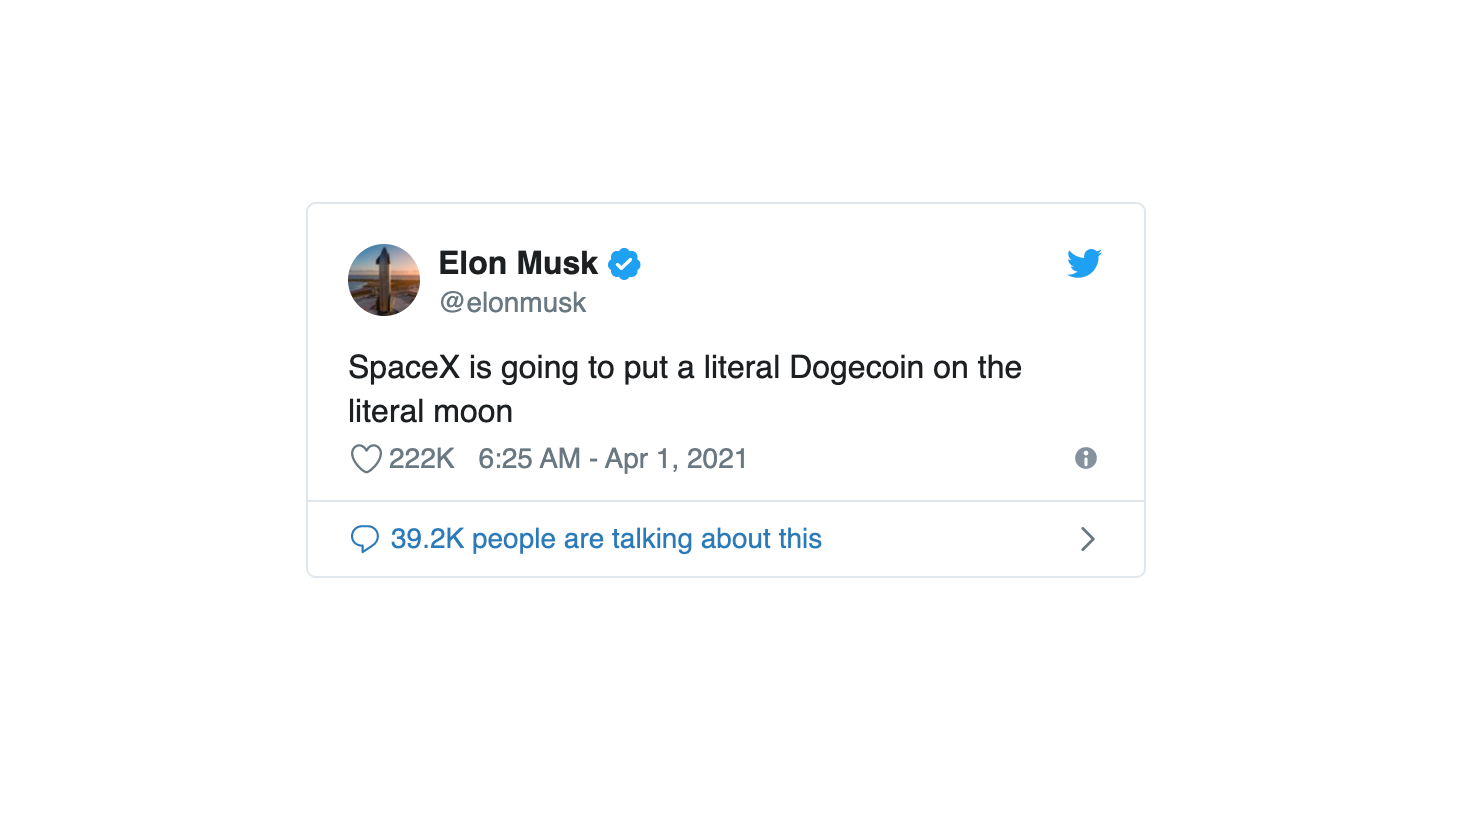 An embedded tweet by Elon Musk saying "SpaceX is going to put a literal Dogecoin on the literal moon"